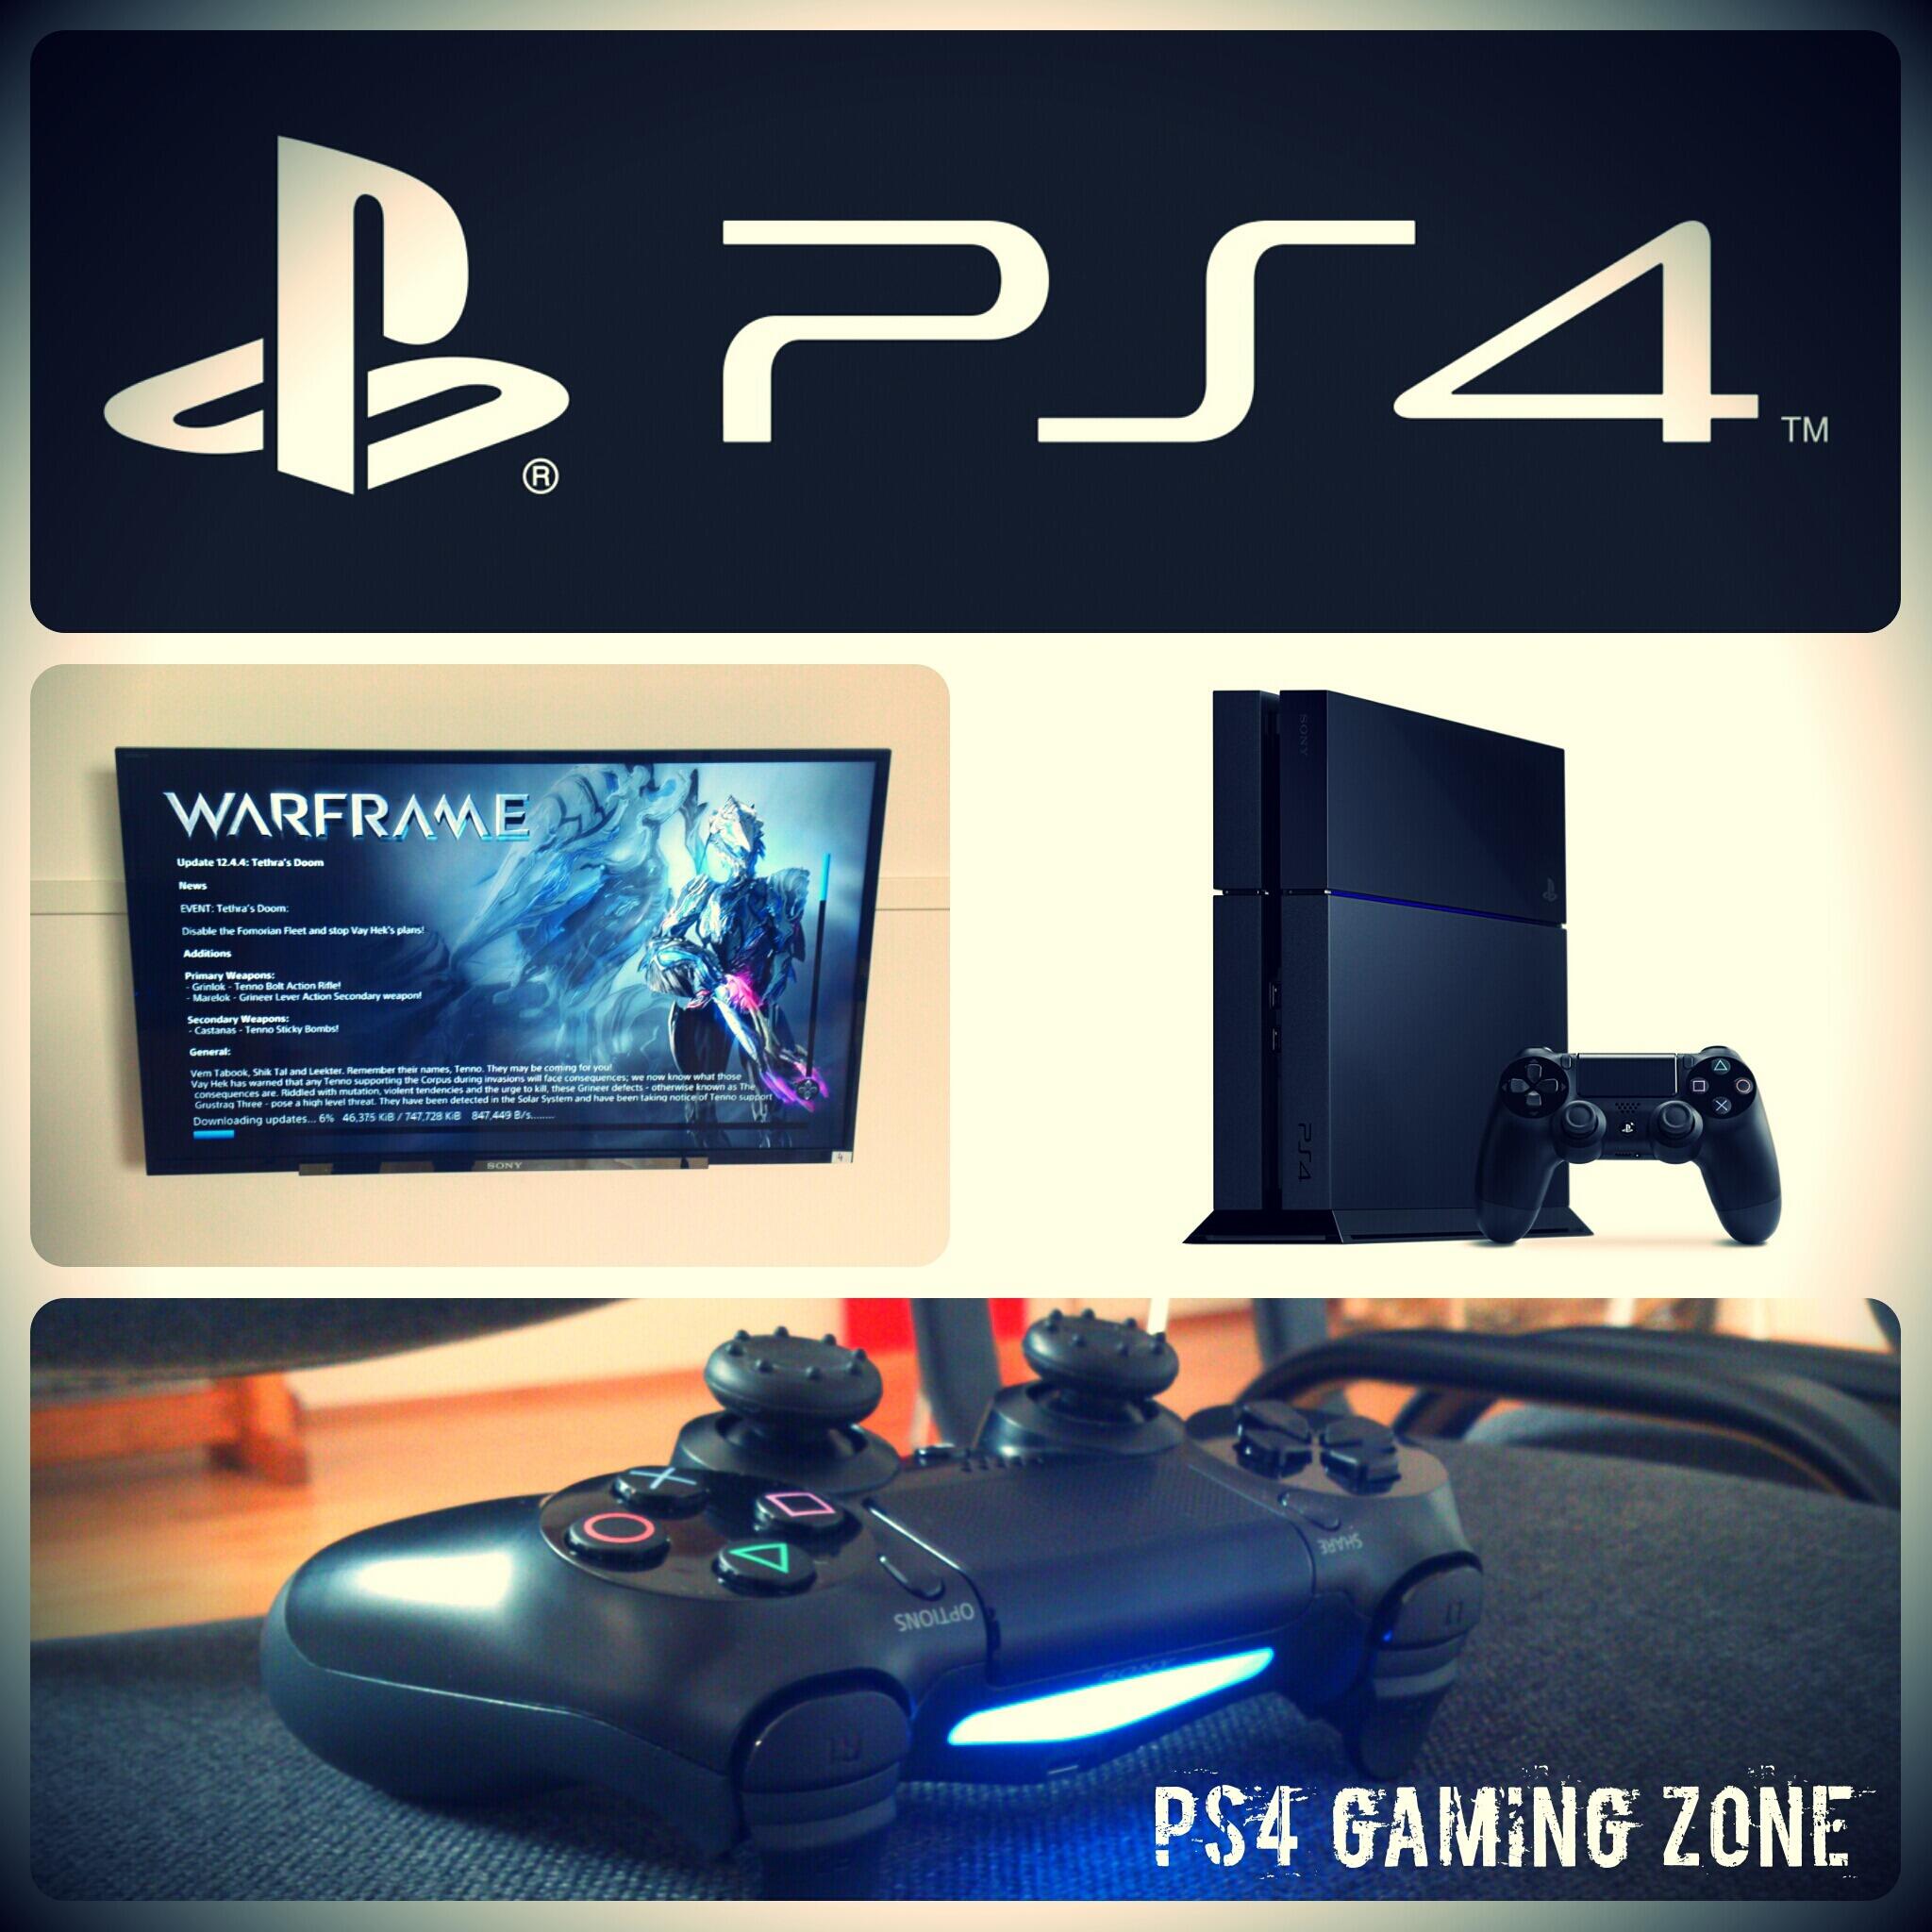 PS4 GAMING ZONE (@Ps4GamingZone) / X